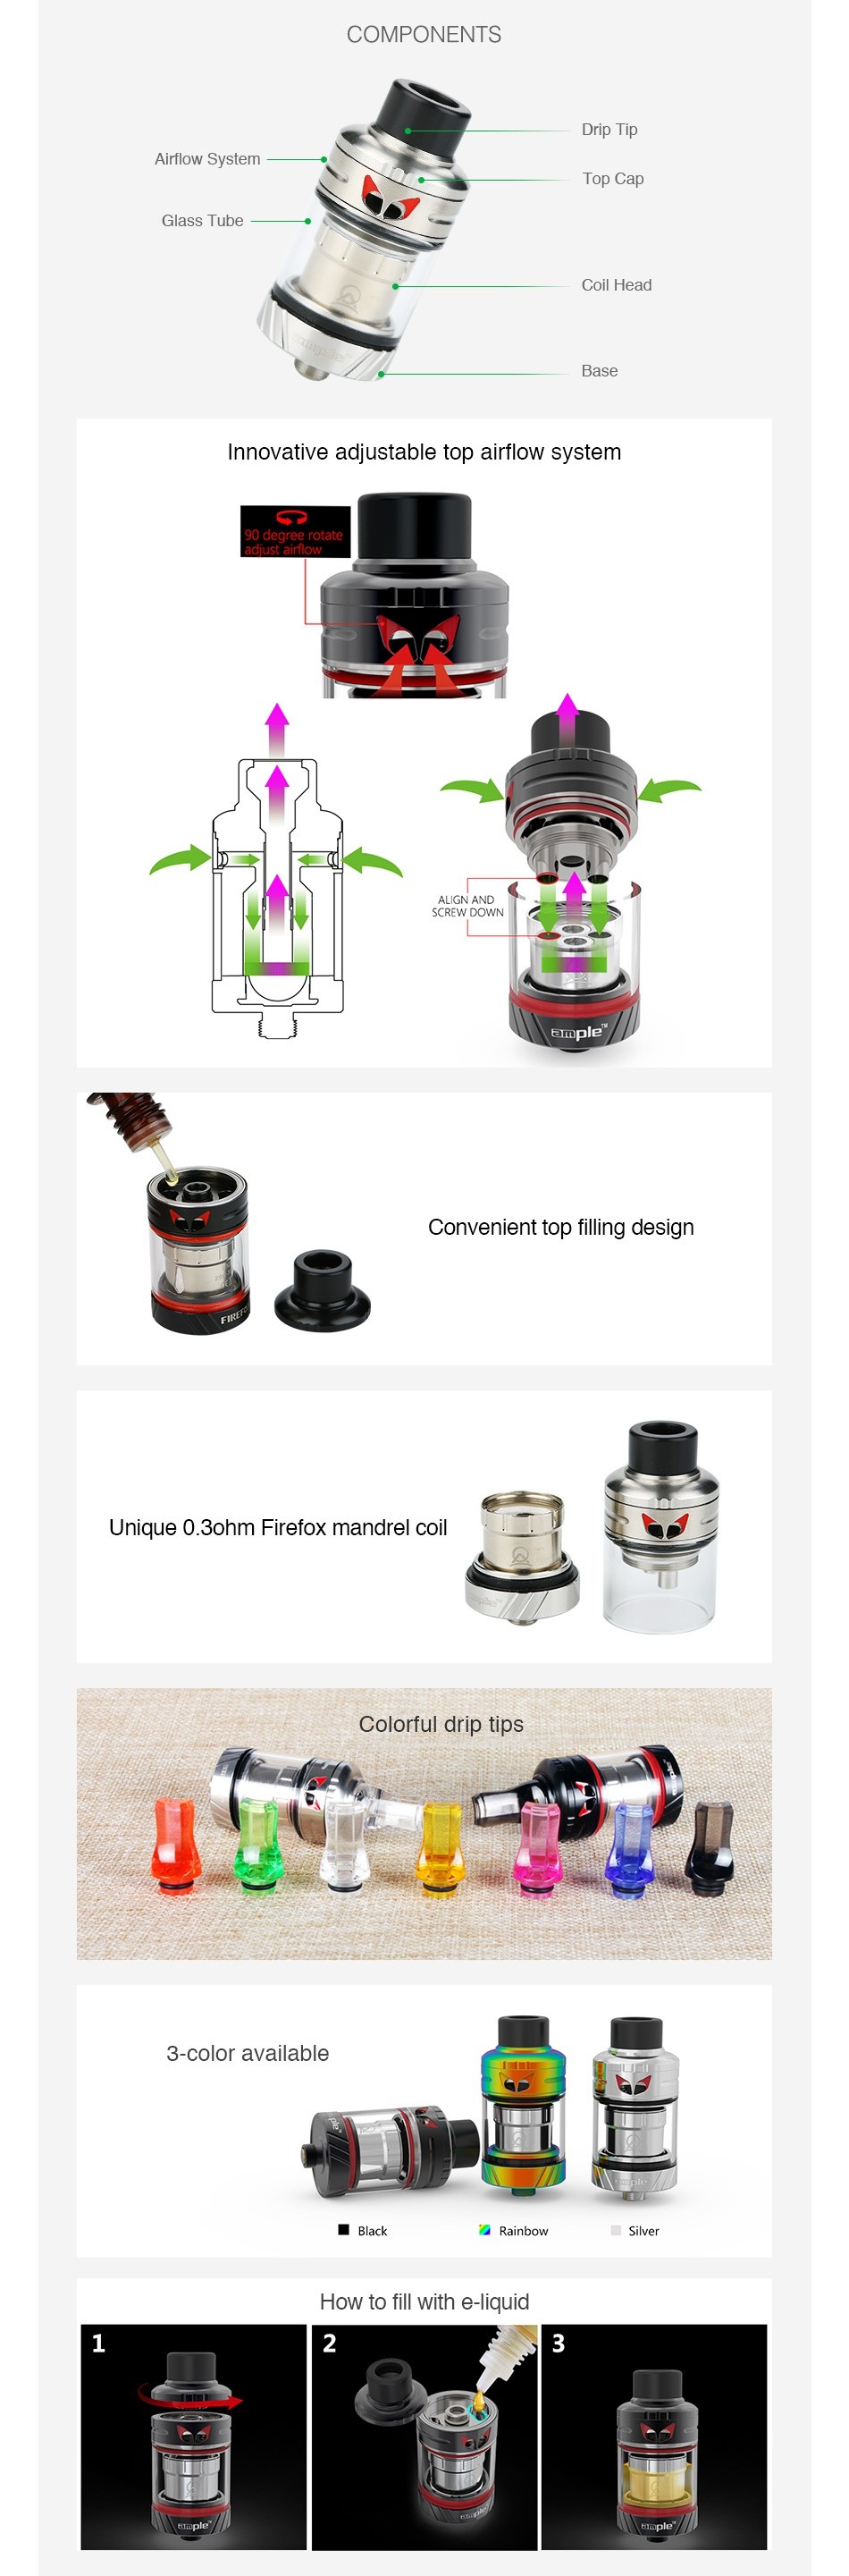 Ample Firefox Tank 2ml COMPONENTS Drip Glass Tube Coll Head Innovative adjustable top airflow system Convenient top filling design Unique 0 ohm Firefox mandrel coil Colorful drip tips 3 color available How to fill with e liquid